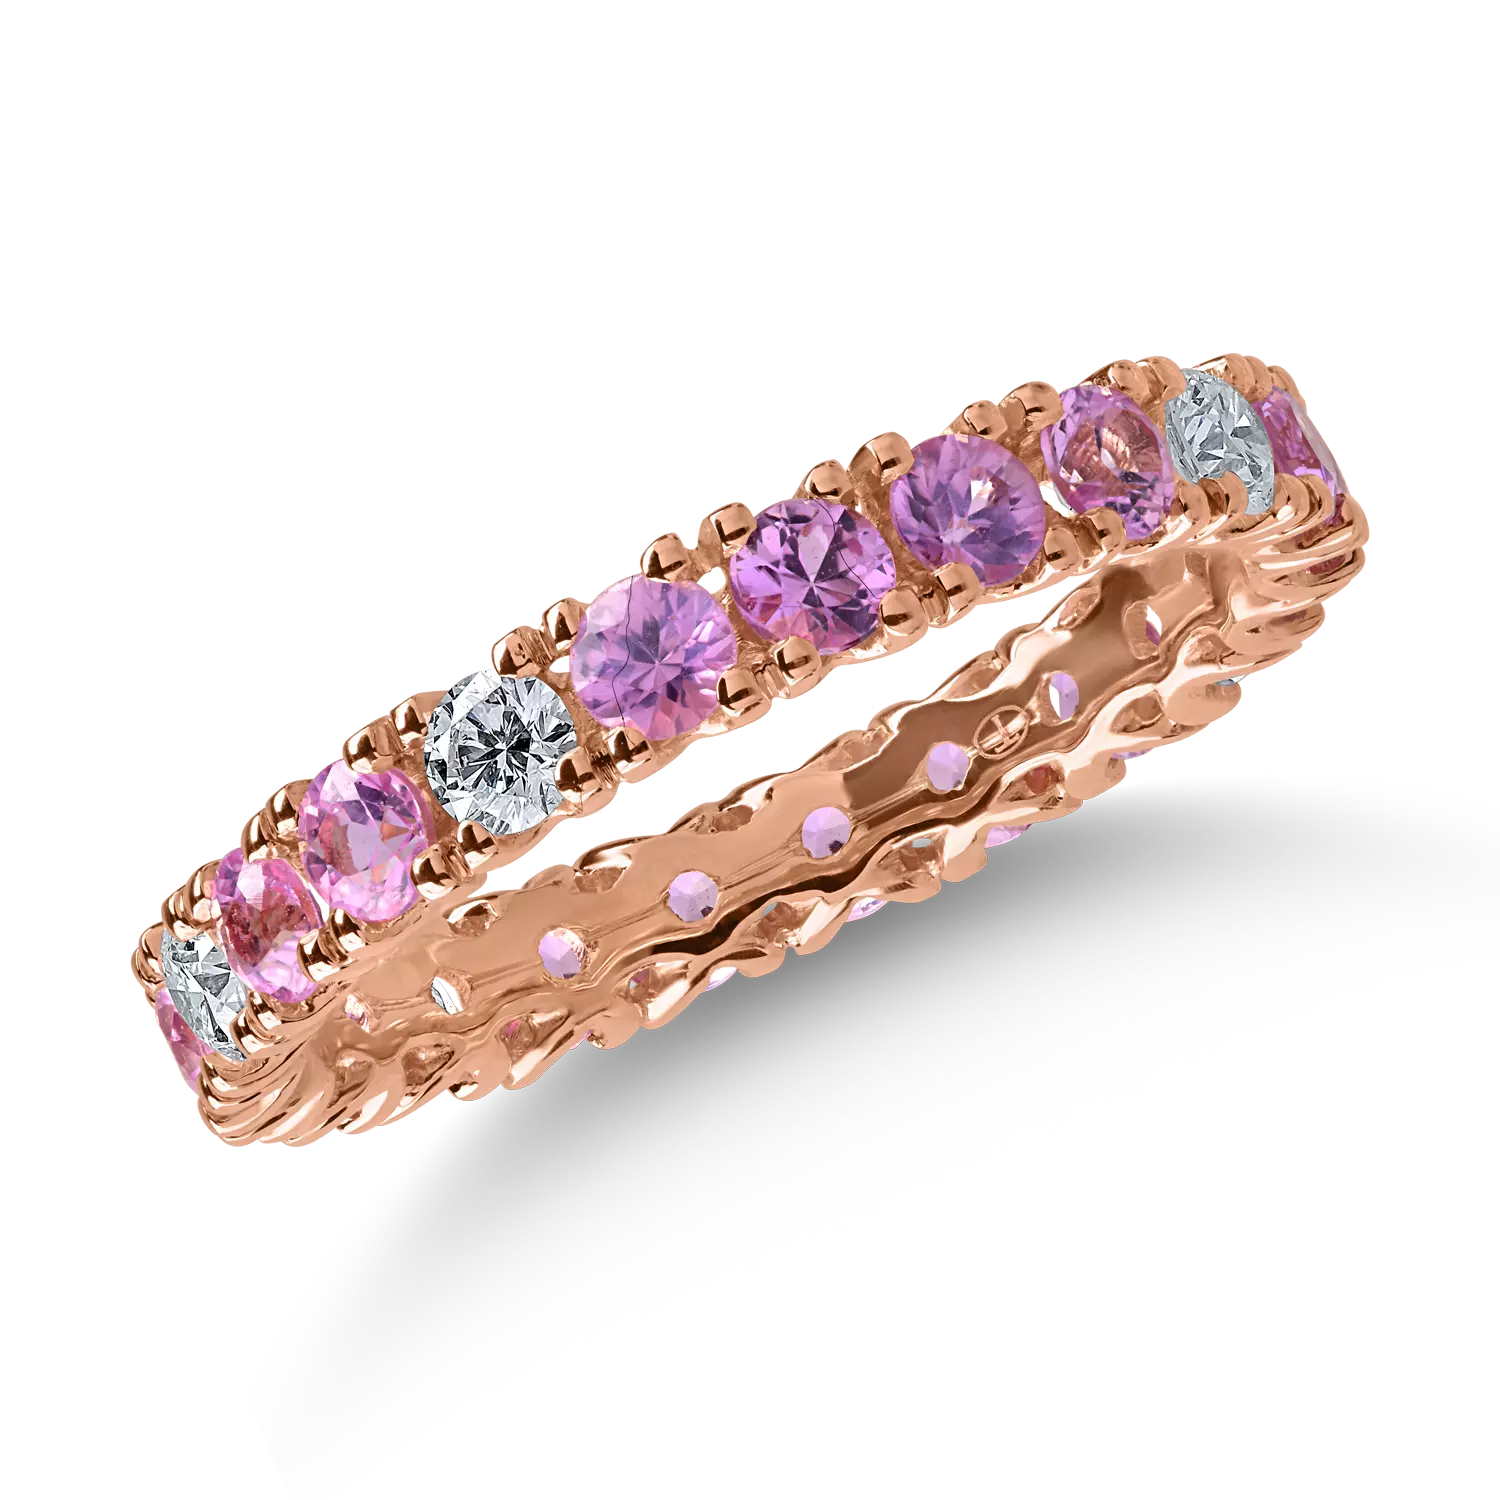 Eternity ring in rose gold with 1.56ct pink sapphires and 0.34ct diamonds